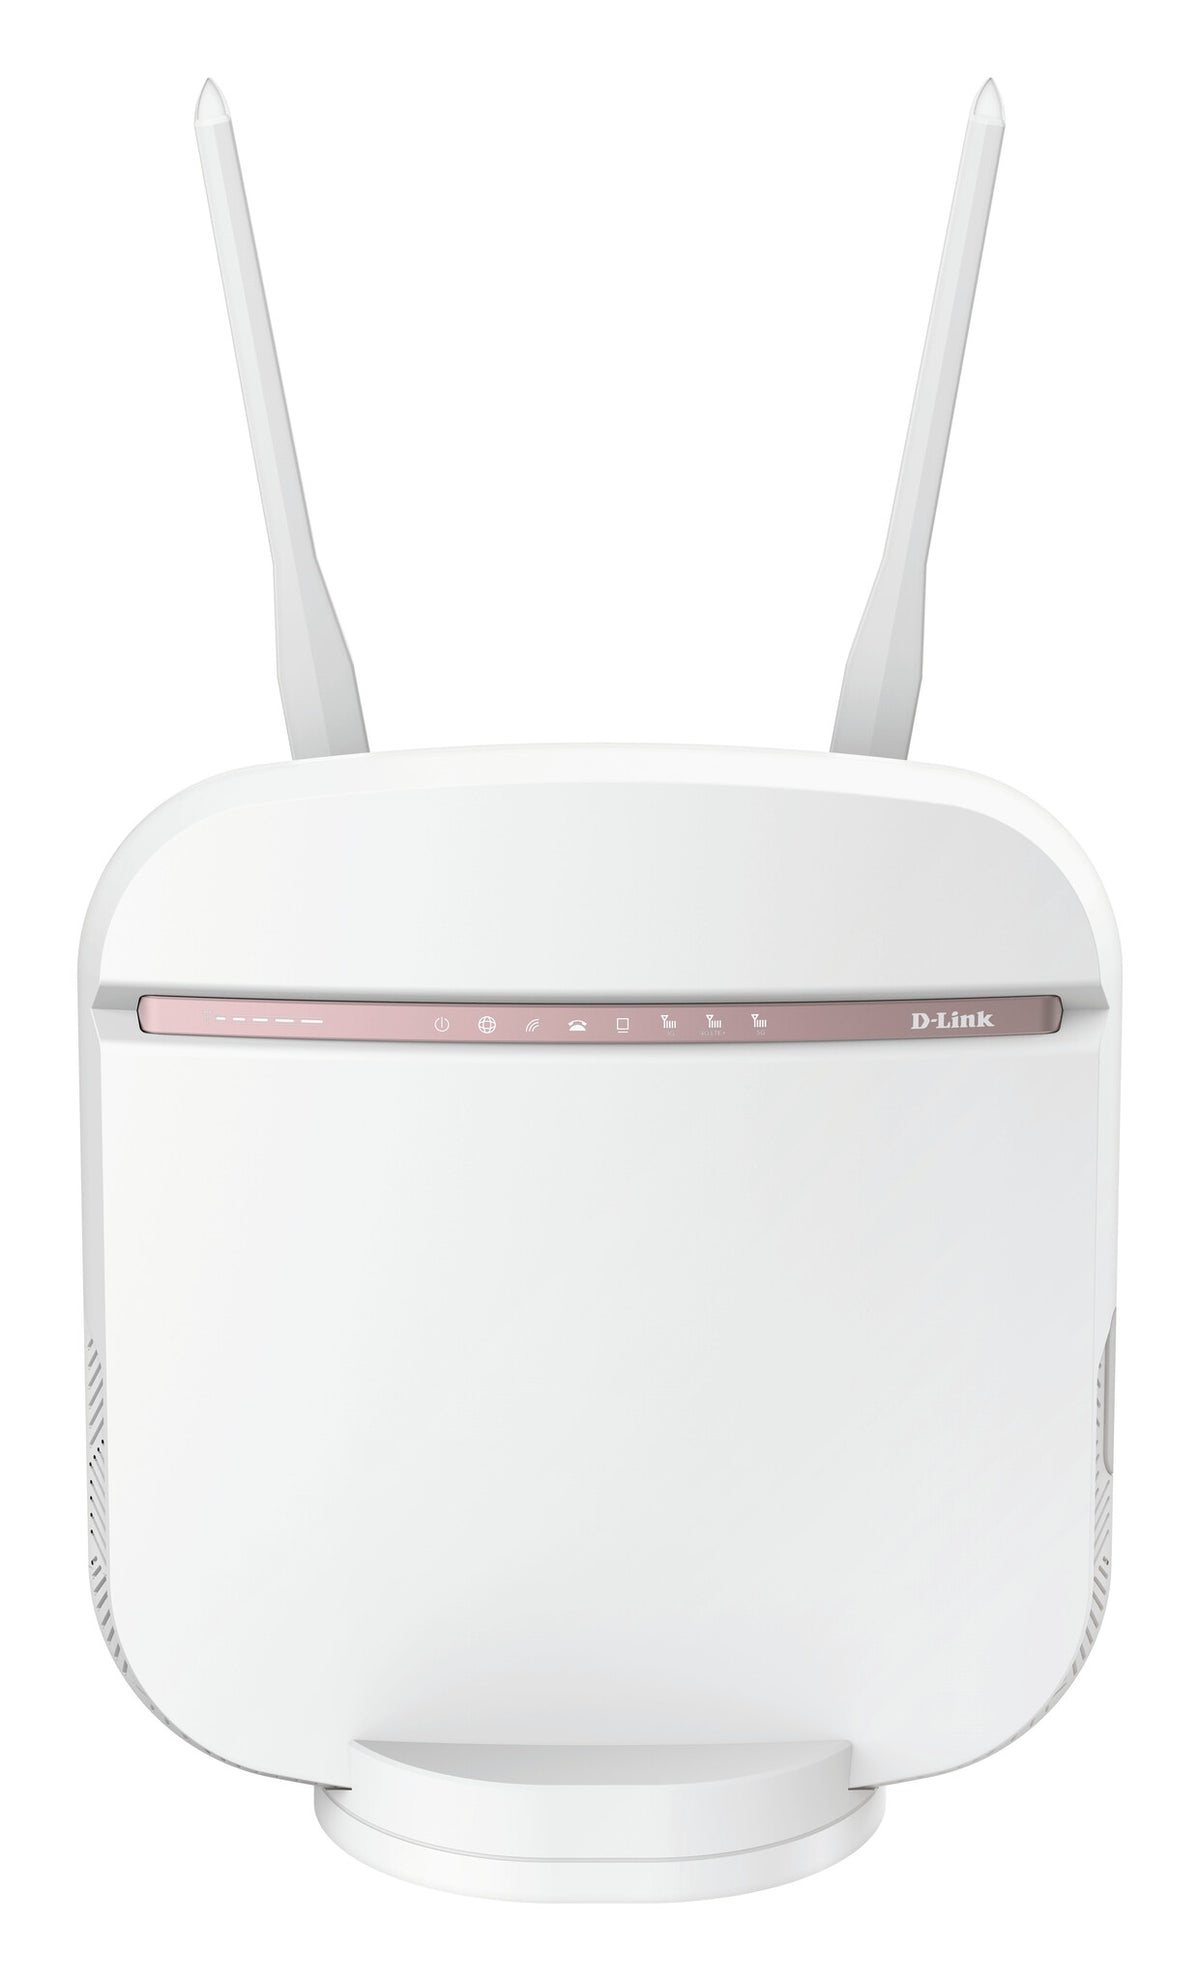 D-Link 5G AC2600 - Dual-band (2.4 GHz / 5 GHz) wireless router in White